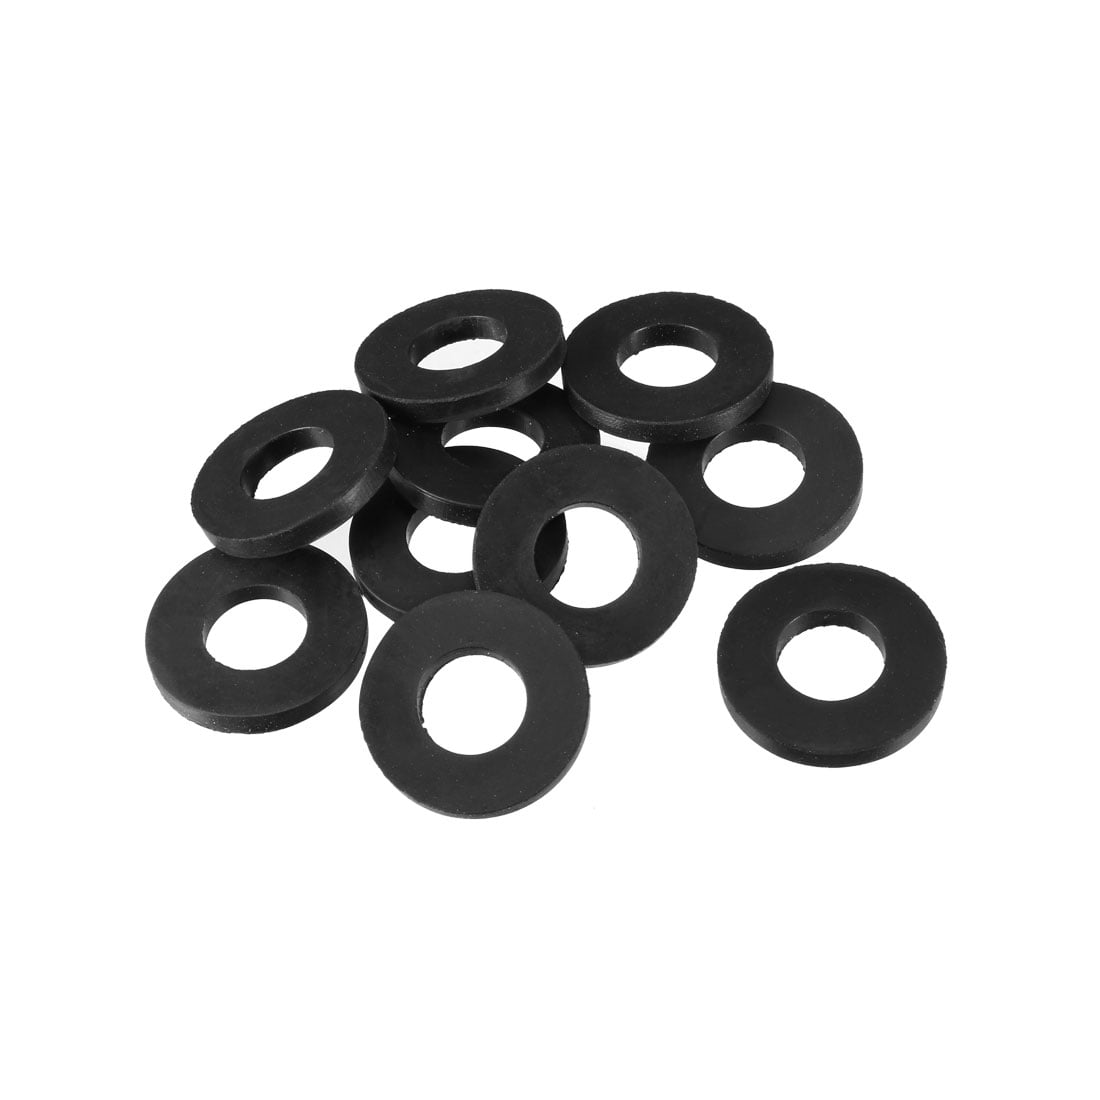 100pcs Flat Rubber O-Ring Seal Hose Gasket Rubber Washer Lot for Faucet Grommet 